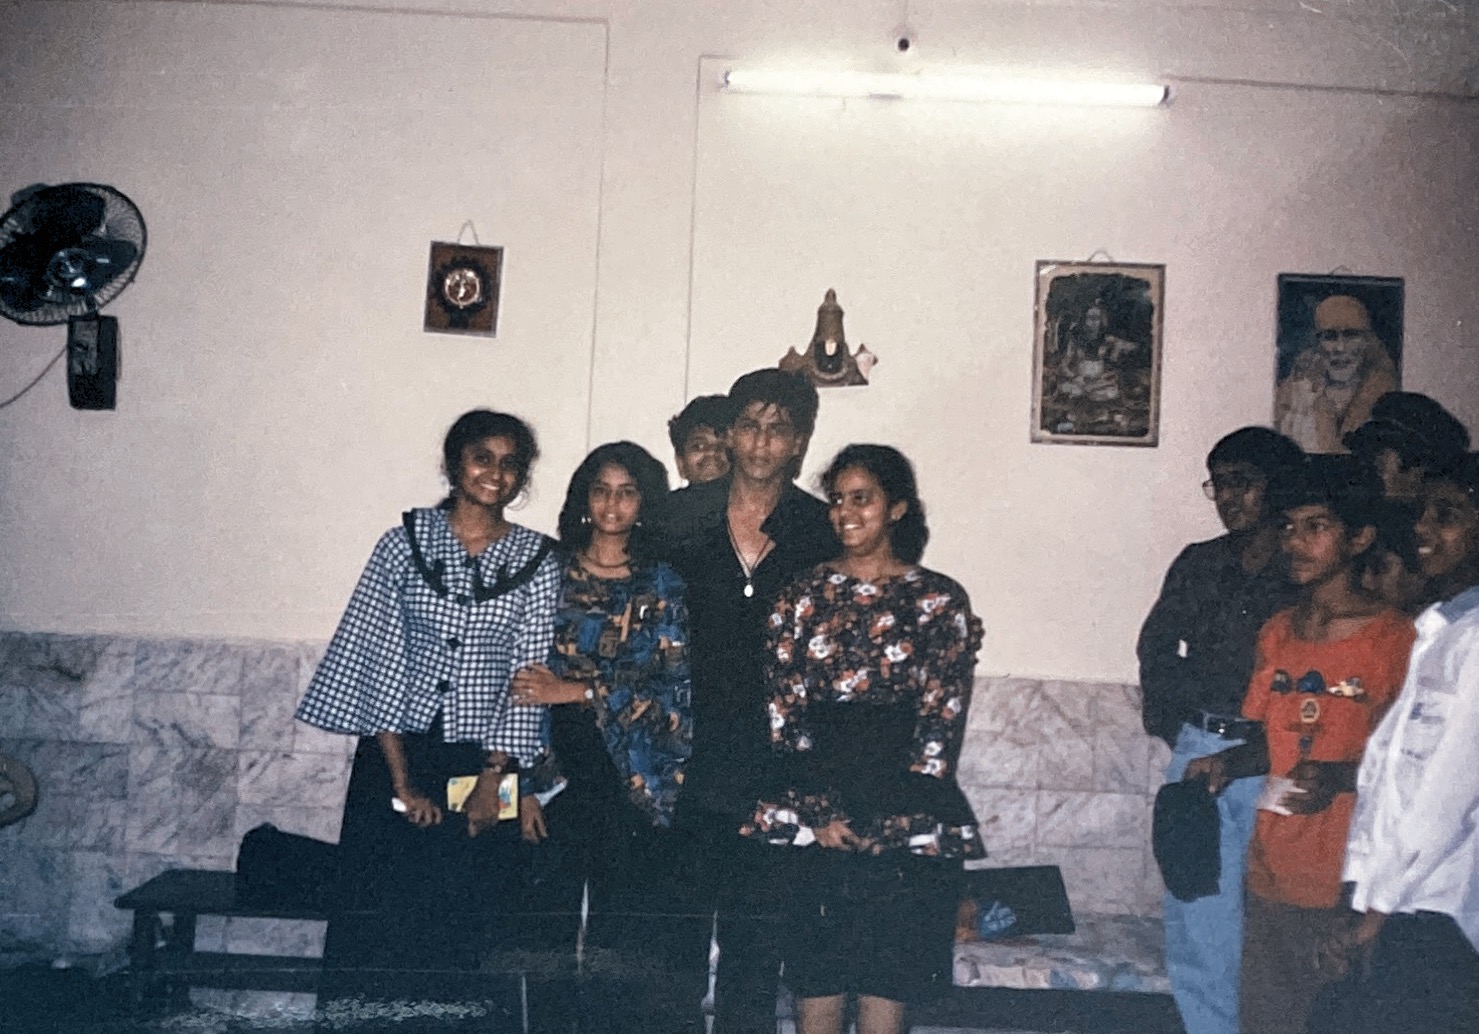 Met with SRK on 09th April 1990